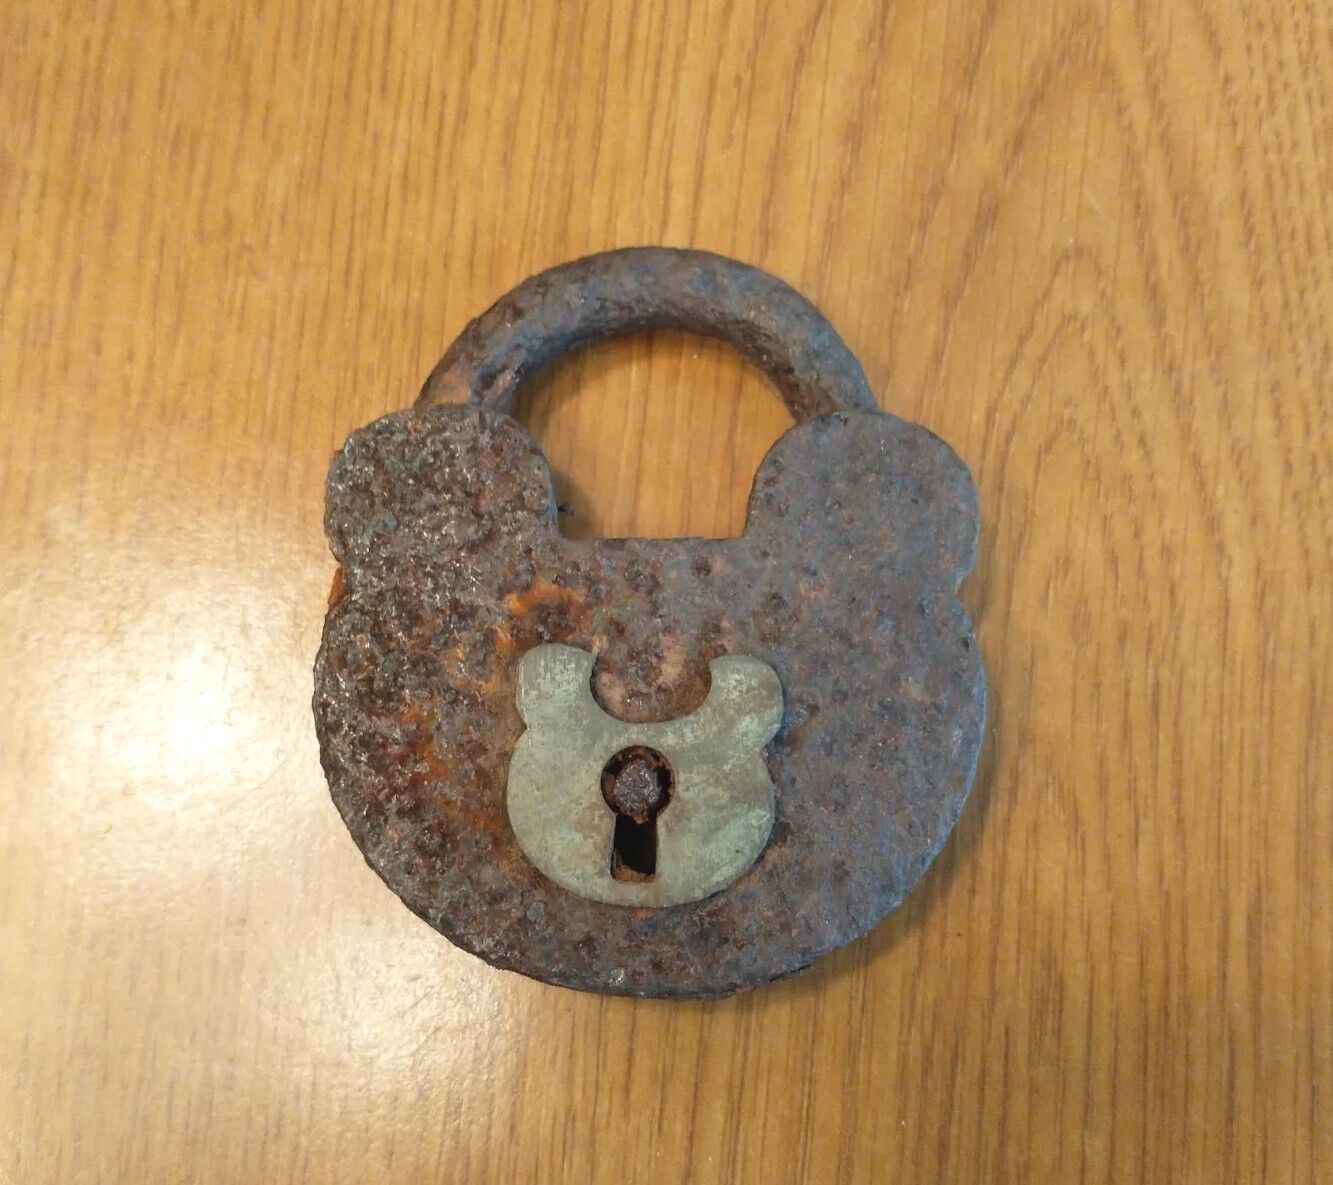 Rare Antique Metal PadLock w Brass Plate Found While Metal Detecting OLD Rusted